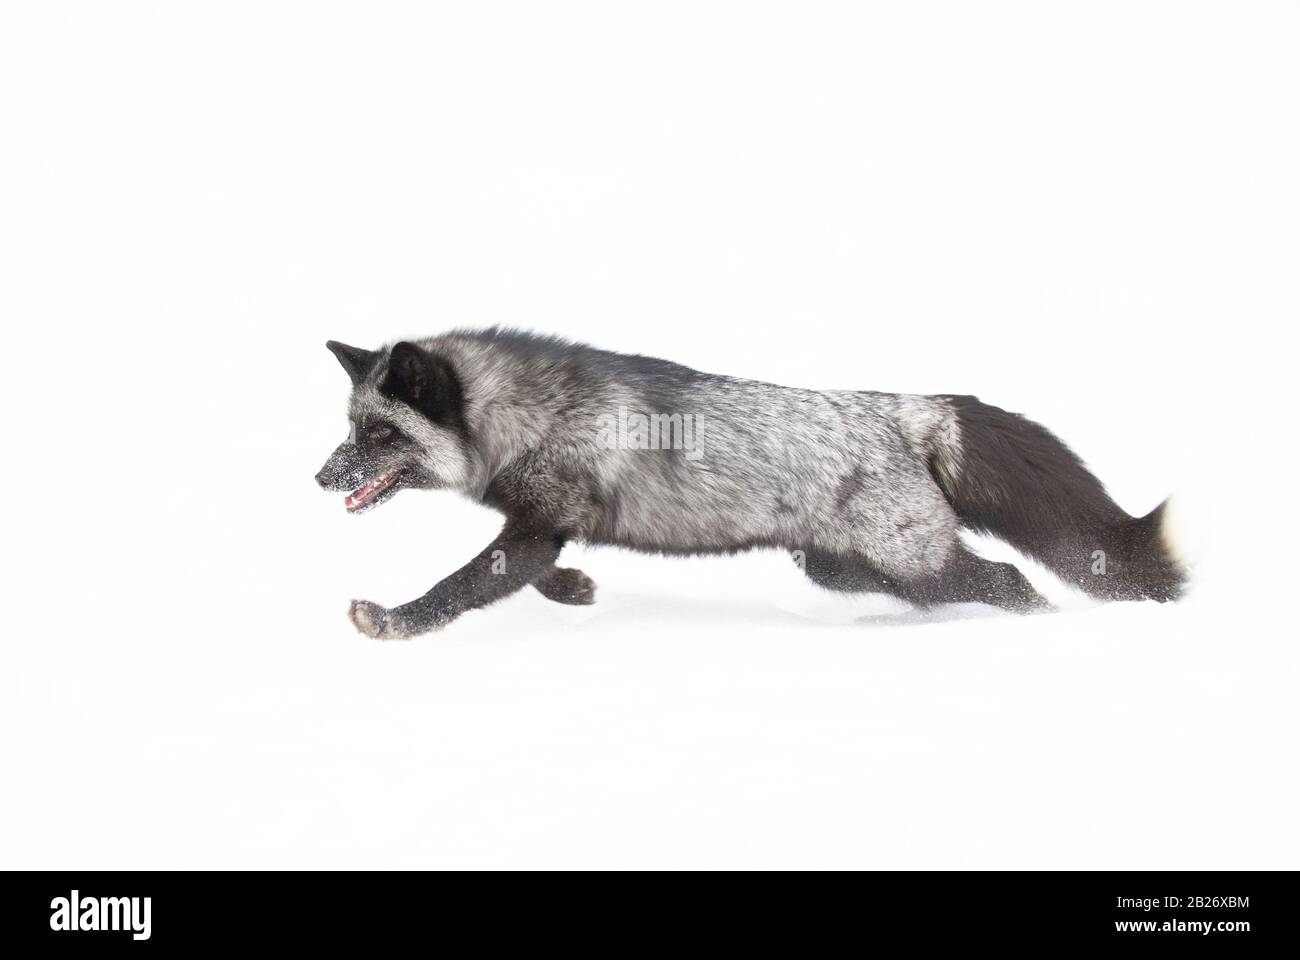 Silver fox (Vulpes vulpes) a melanistic form of the red fox running in the snow in Montana, USA Stock Photo